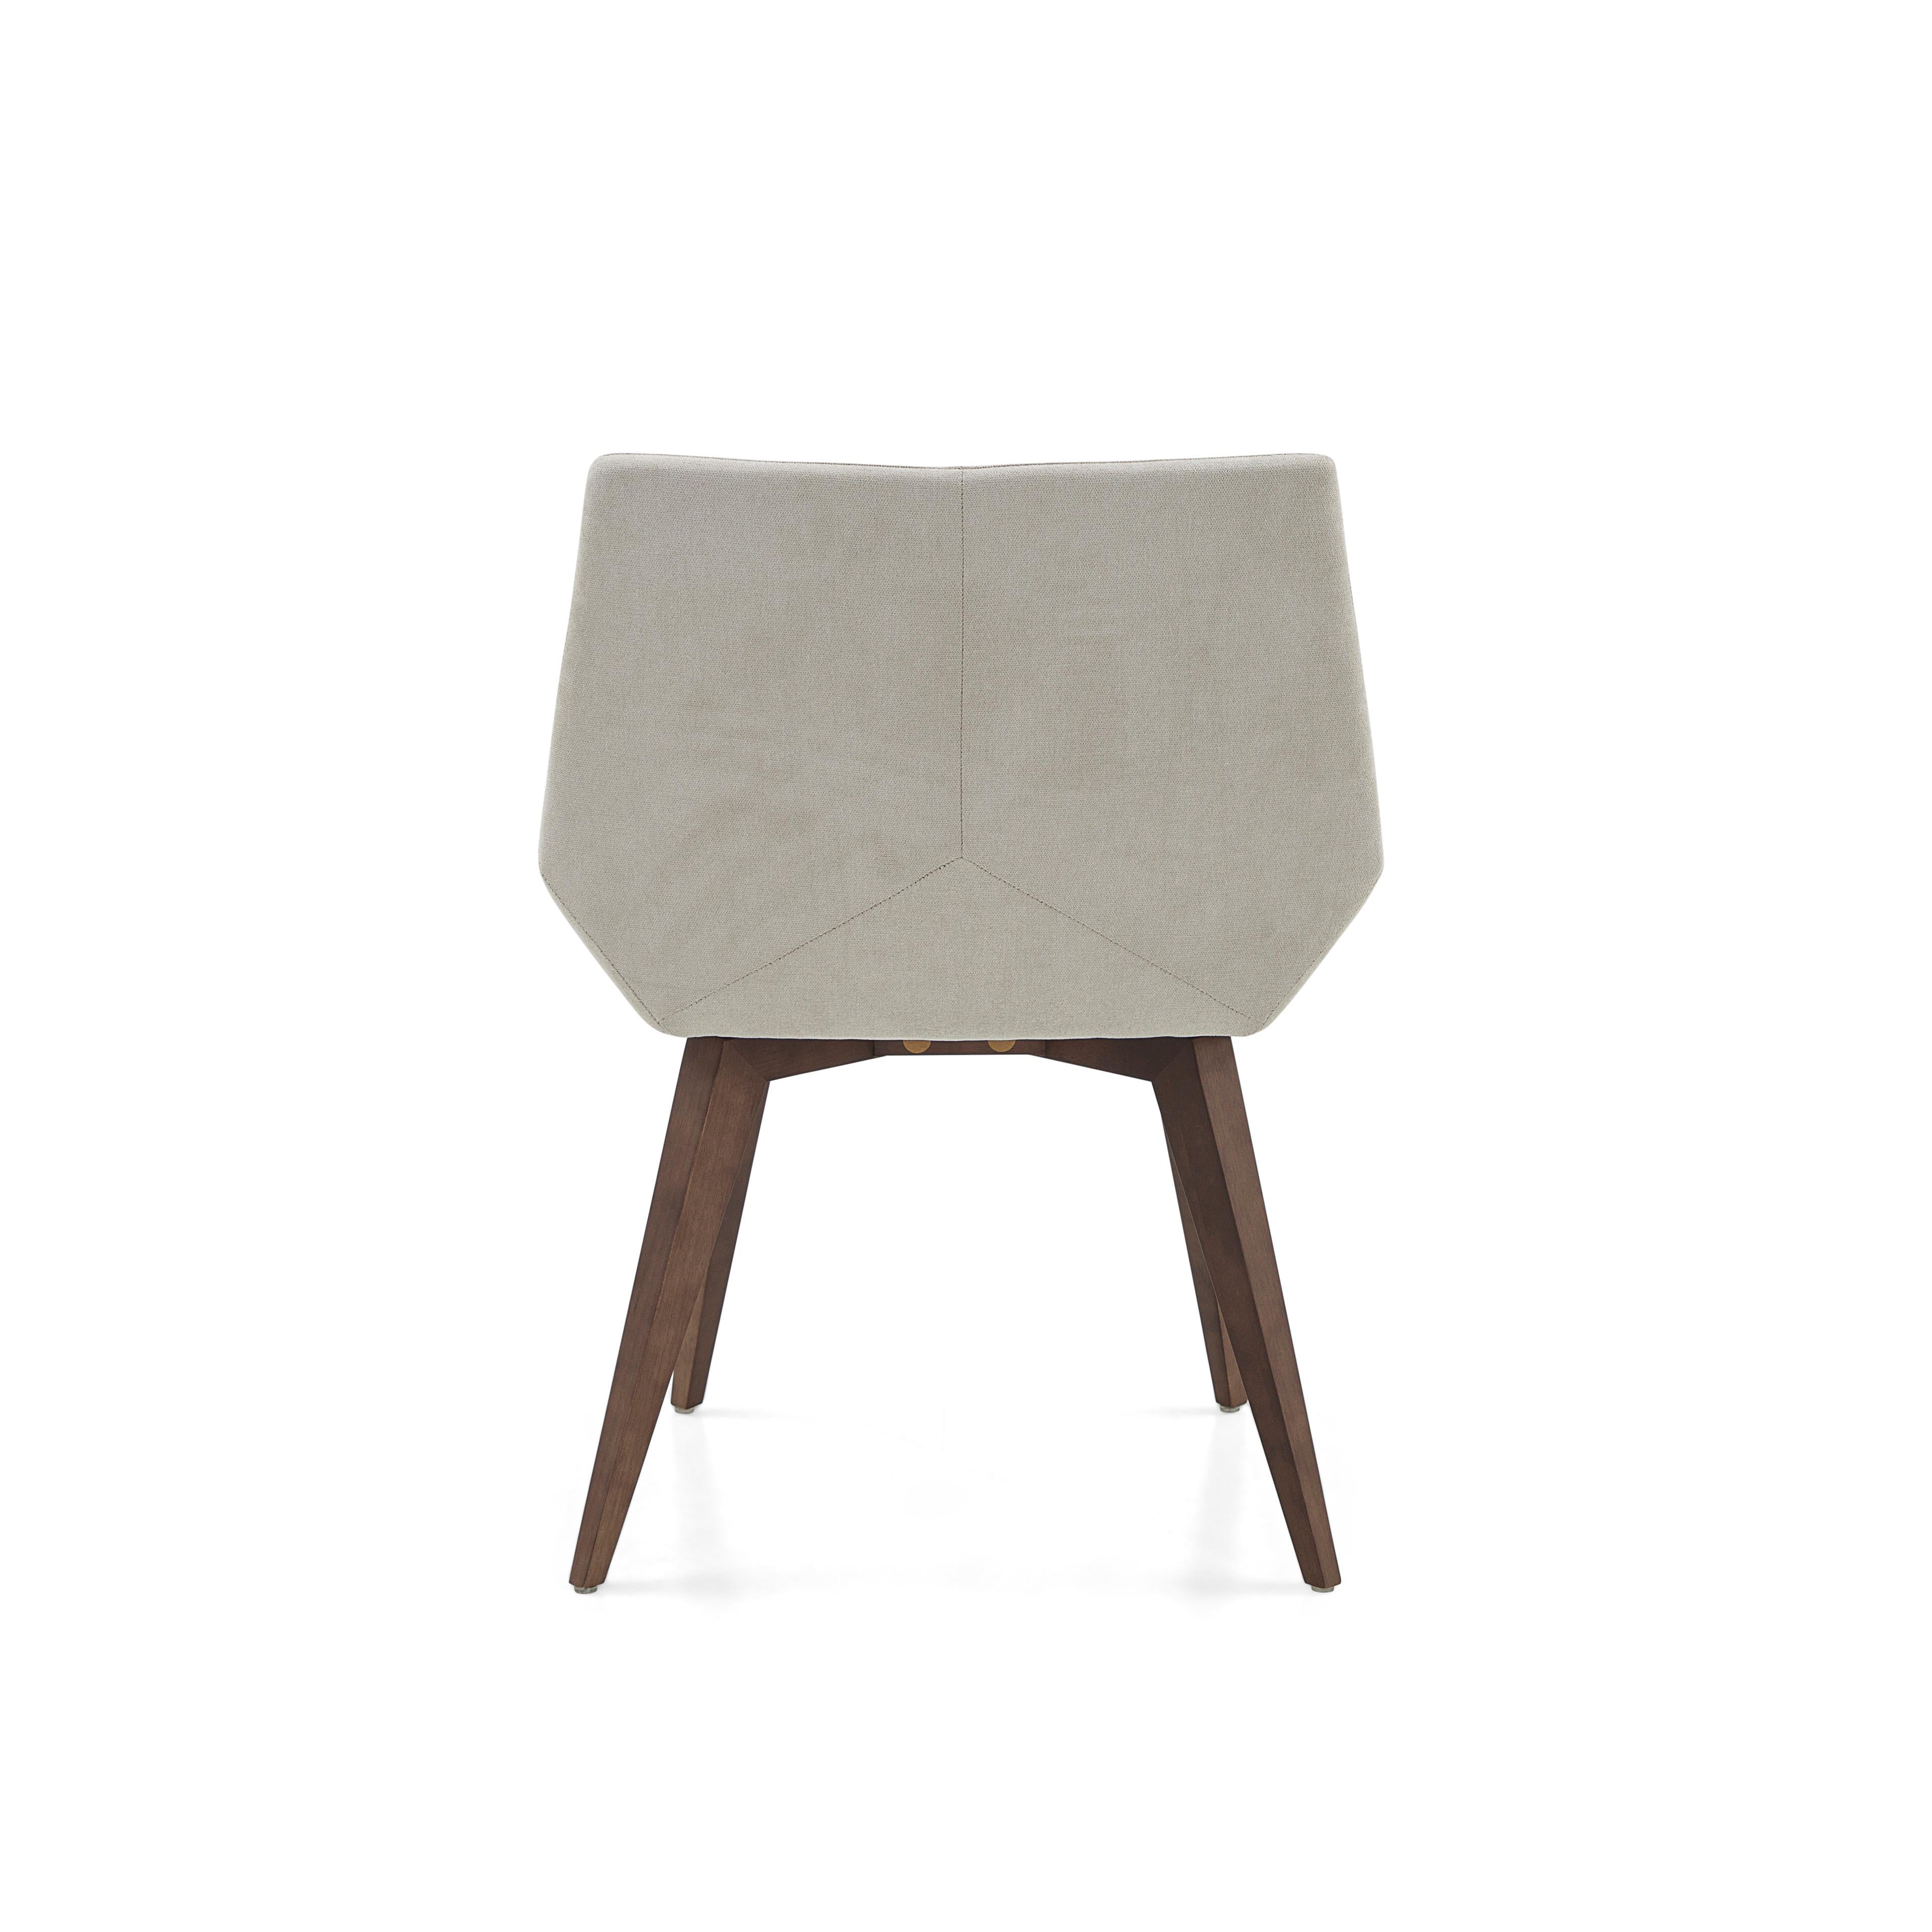 Brazilian Geometric Cubi Dining Chair with Walnut Wood Base and Light Gray Fabric For Sale